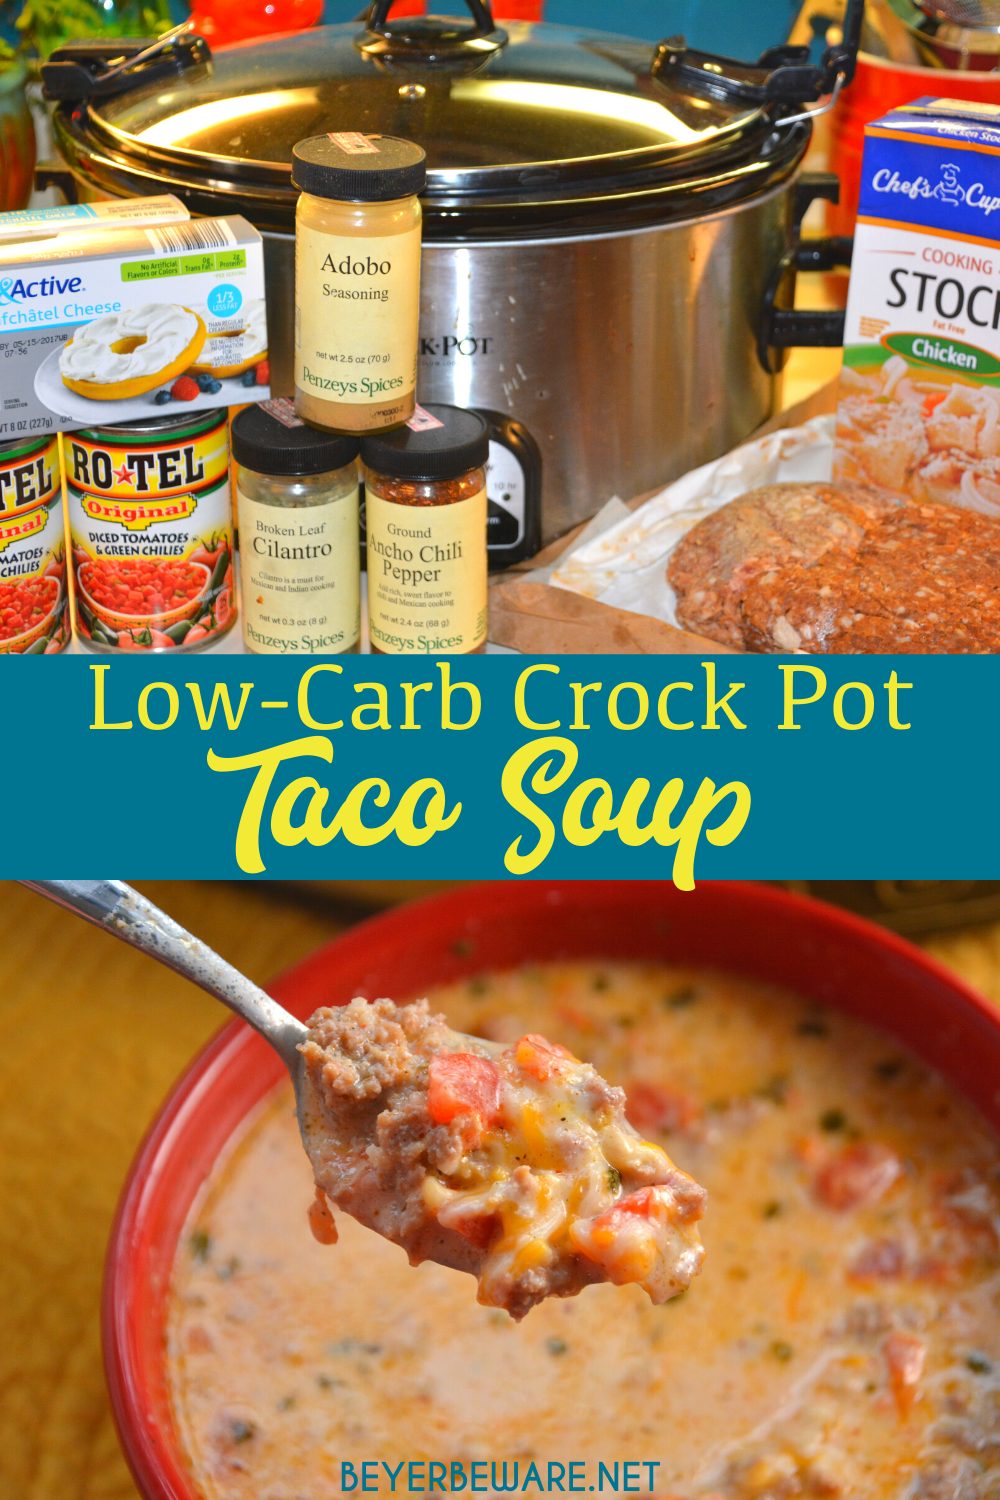 Low-Carb Crock Pot Taco Soup - Whether you are eating low-carb or gluten-free, this keto taco soup recipe is sure to be loved by all Mexican food lovers. 